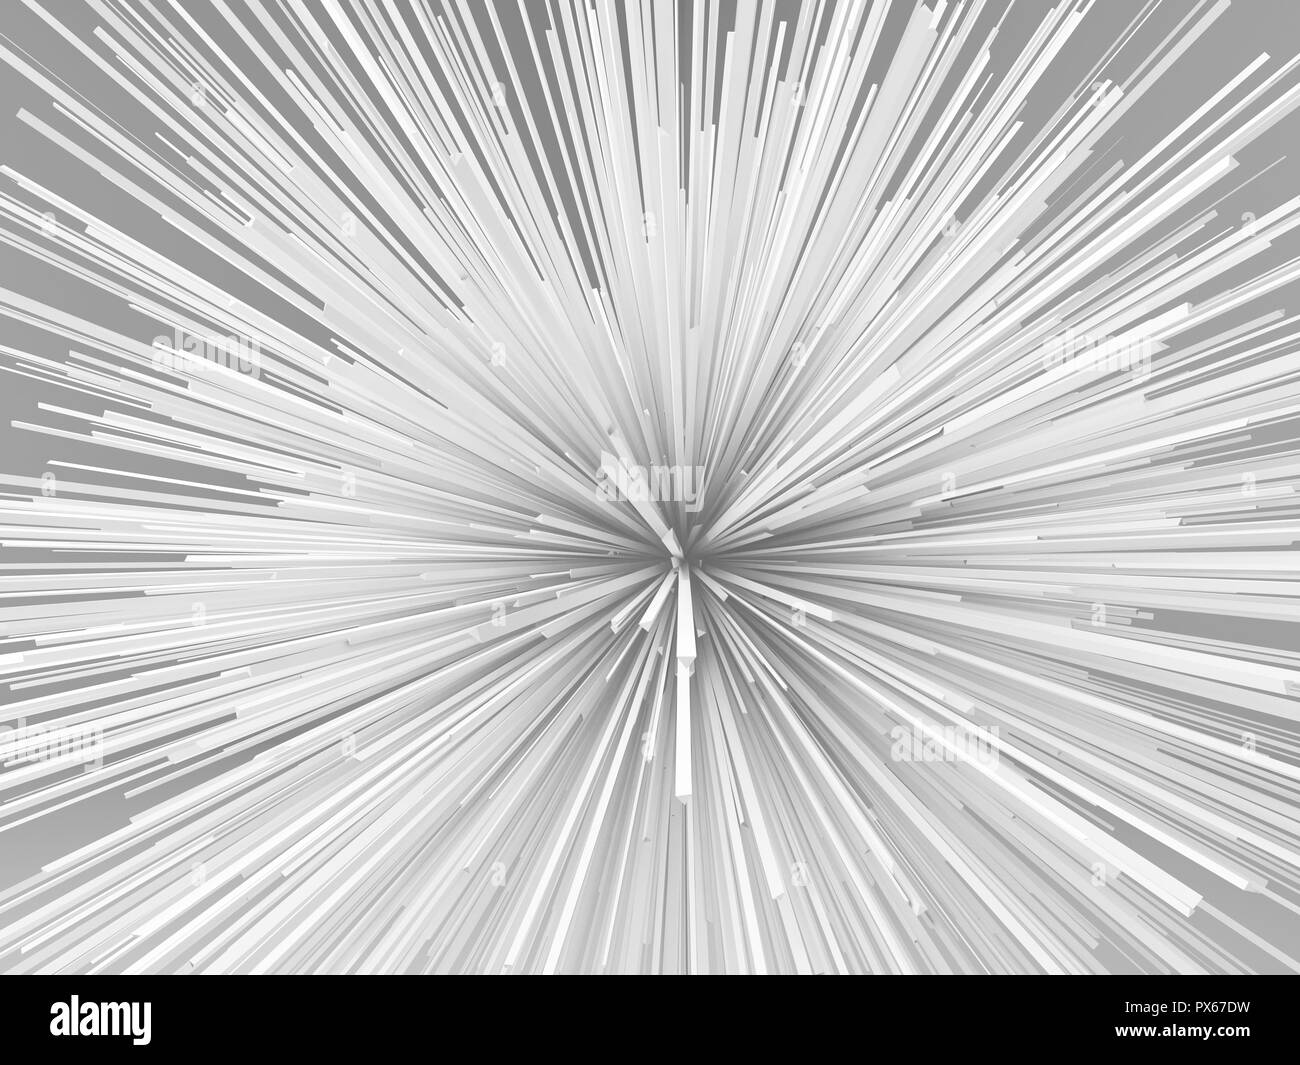 Abstract white radial explosion pattern. 3d illustration Stock Photo